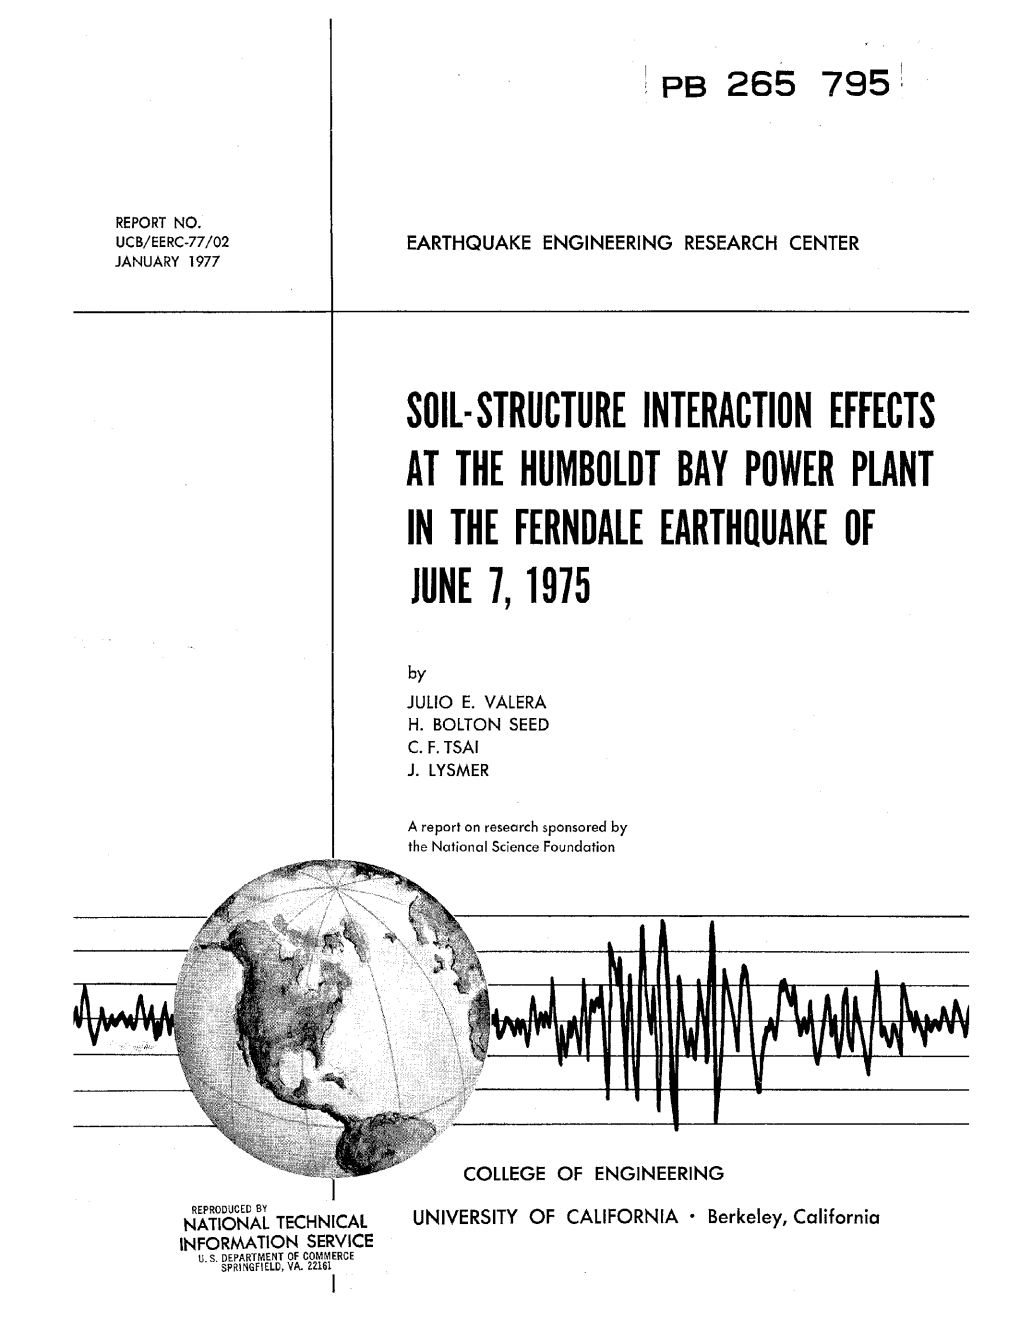 Soil-Structure Interaction Effects at the Humboldt Bay Power Plant in the Ferndale Earthquake of June 7, 1975